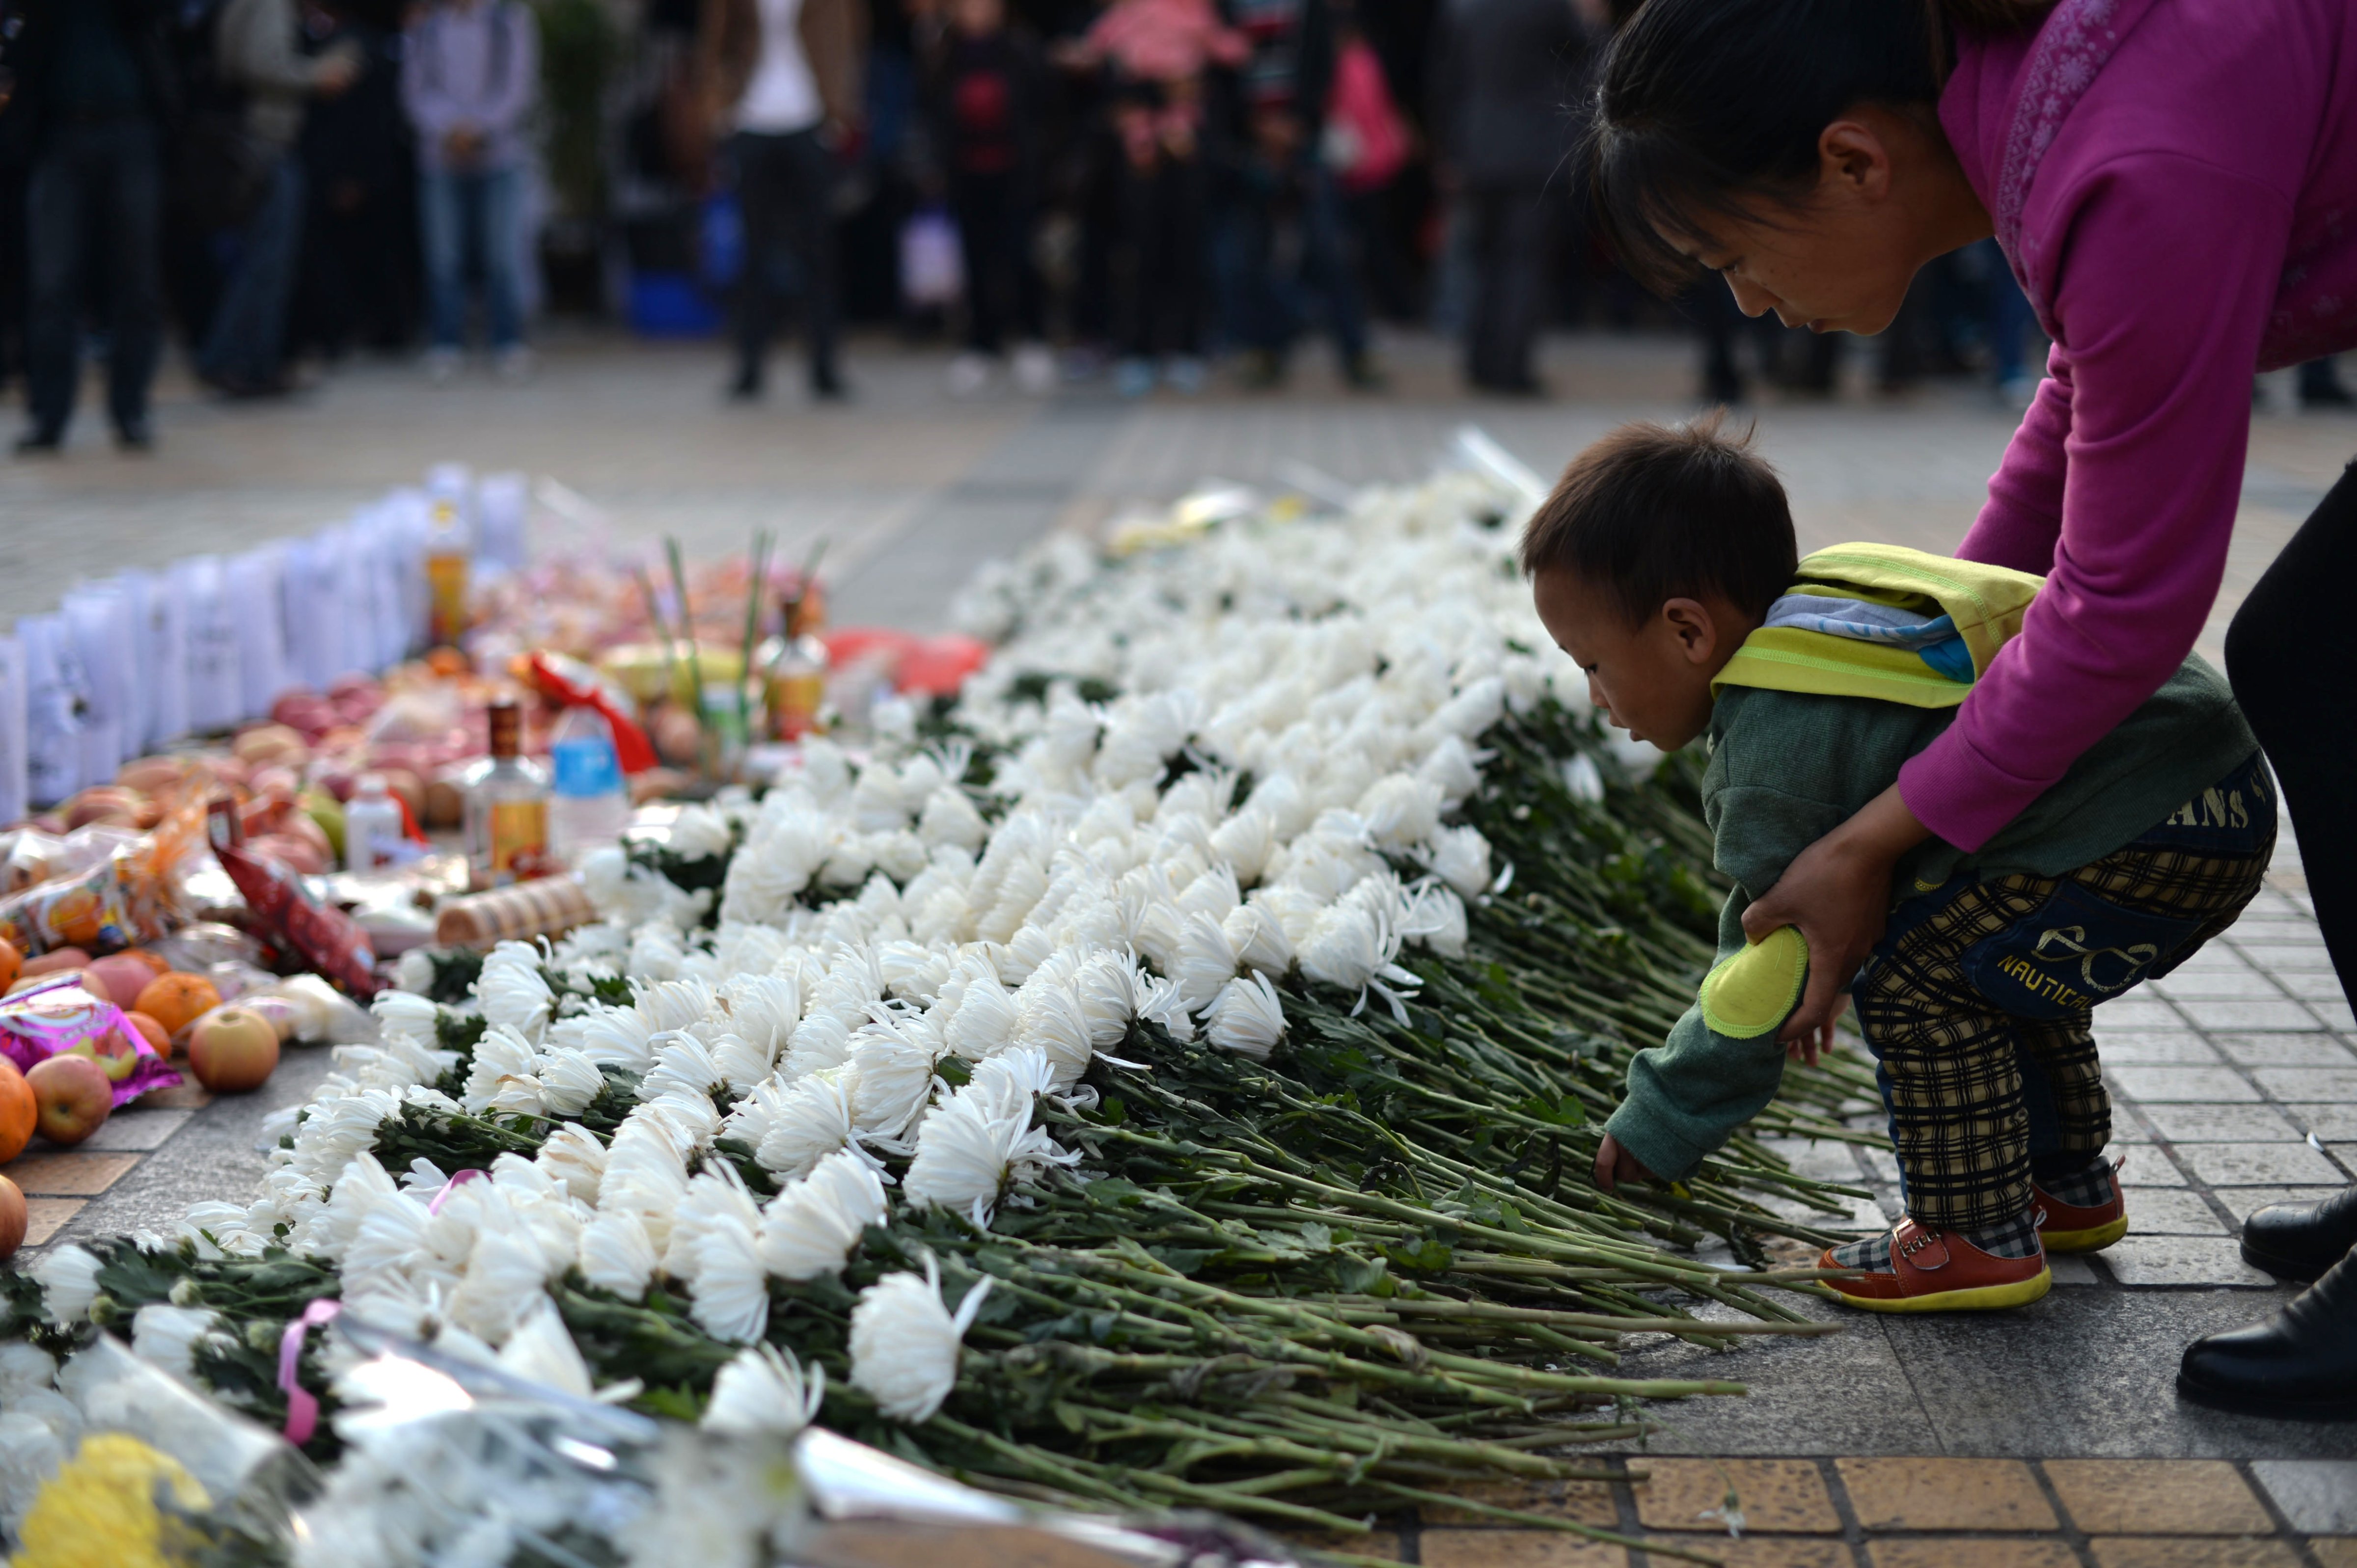 This picture taken on March 7, 2014, shows a child laying a flower at the scene of a terrorist attack at the main train station in Kunming, southwest China's Yunnan province. The attack in Kunming killed 29 people and injured 143 (AFP/Getty Images)